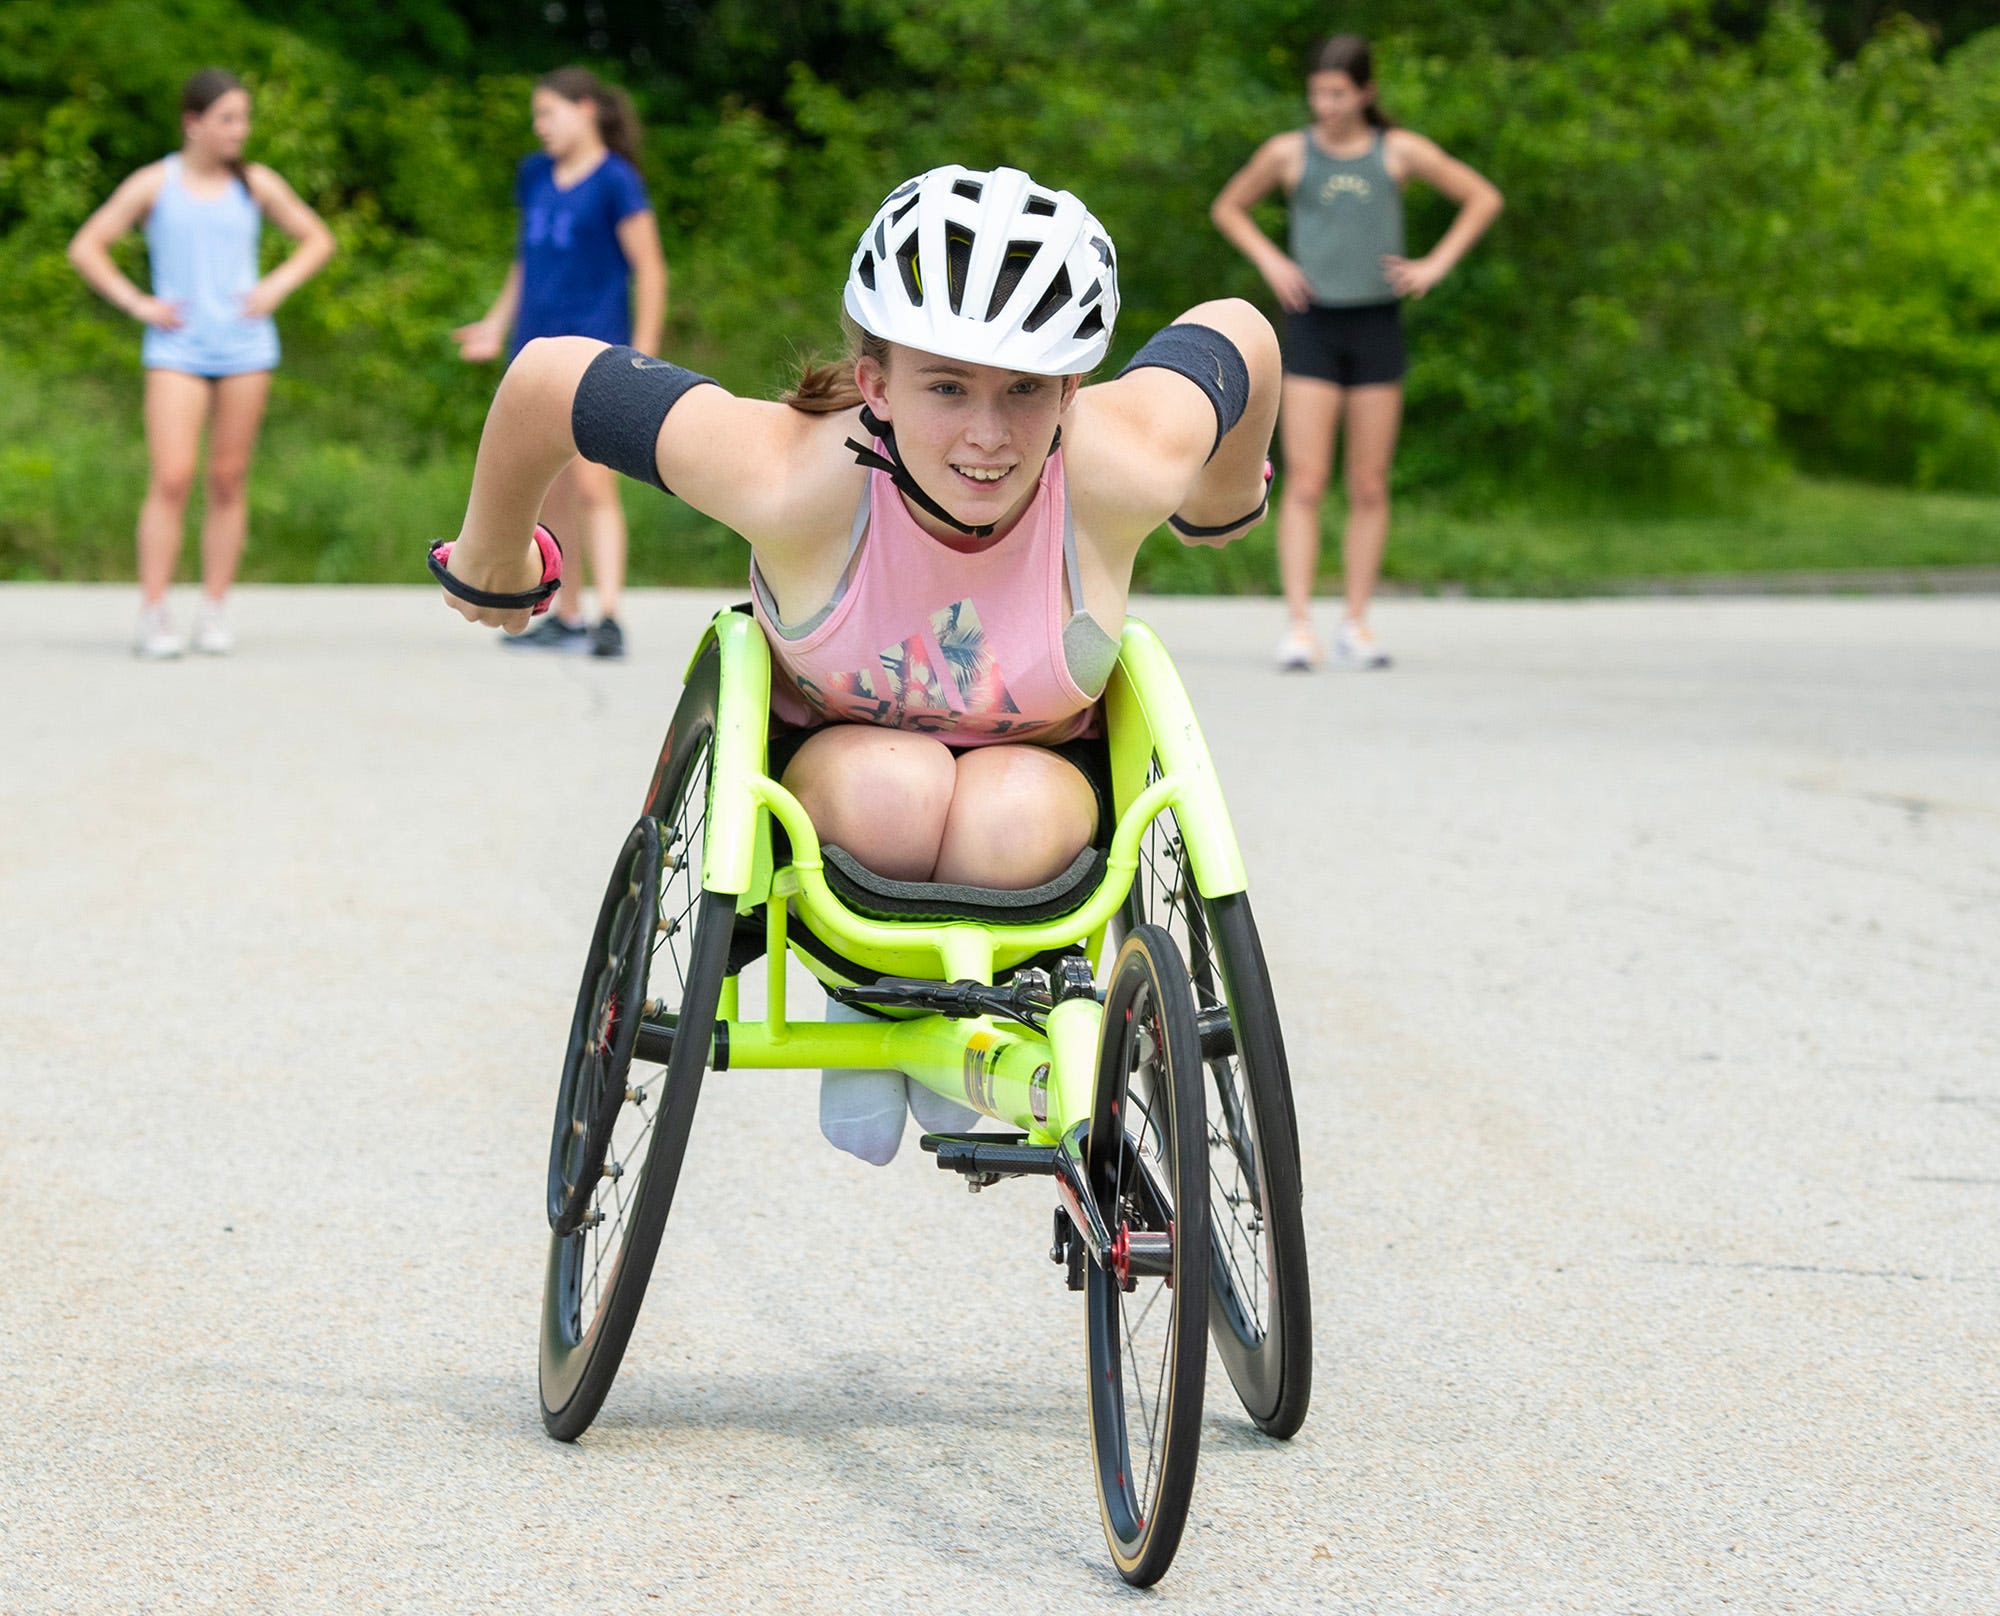 'Nothing stops her': Notre Dame's Maddie Wilson sets sights on defending track and field para championships